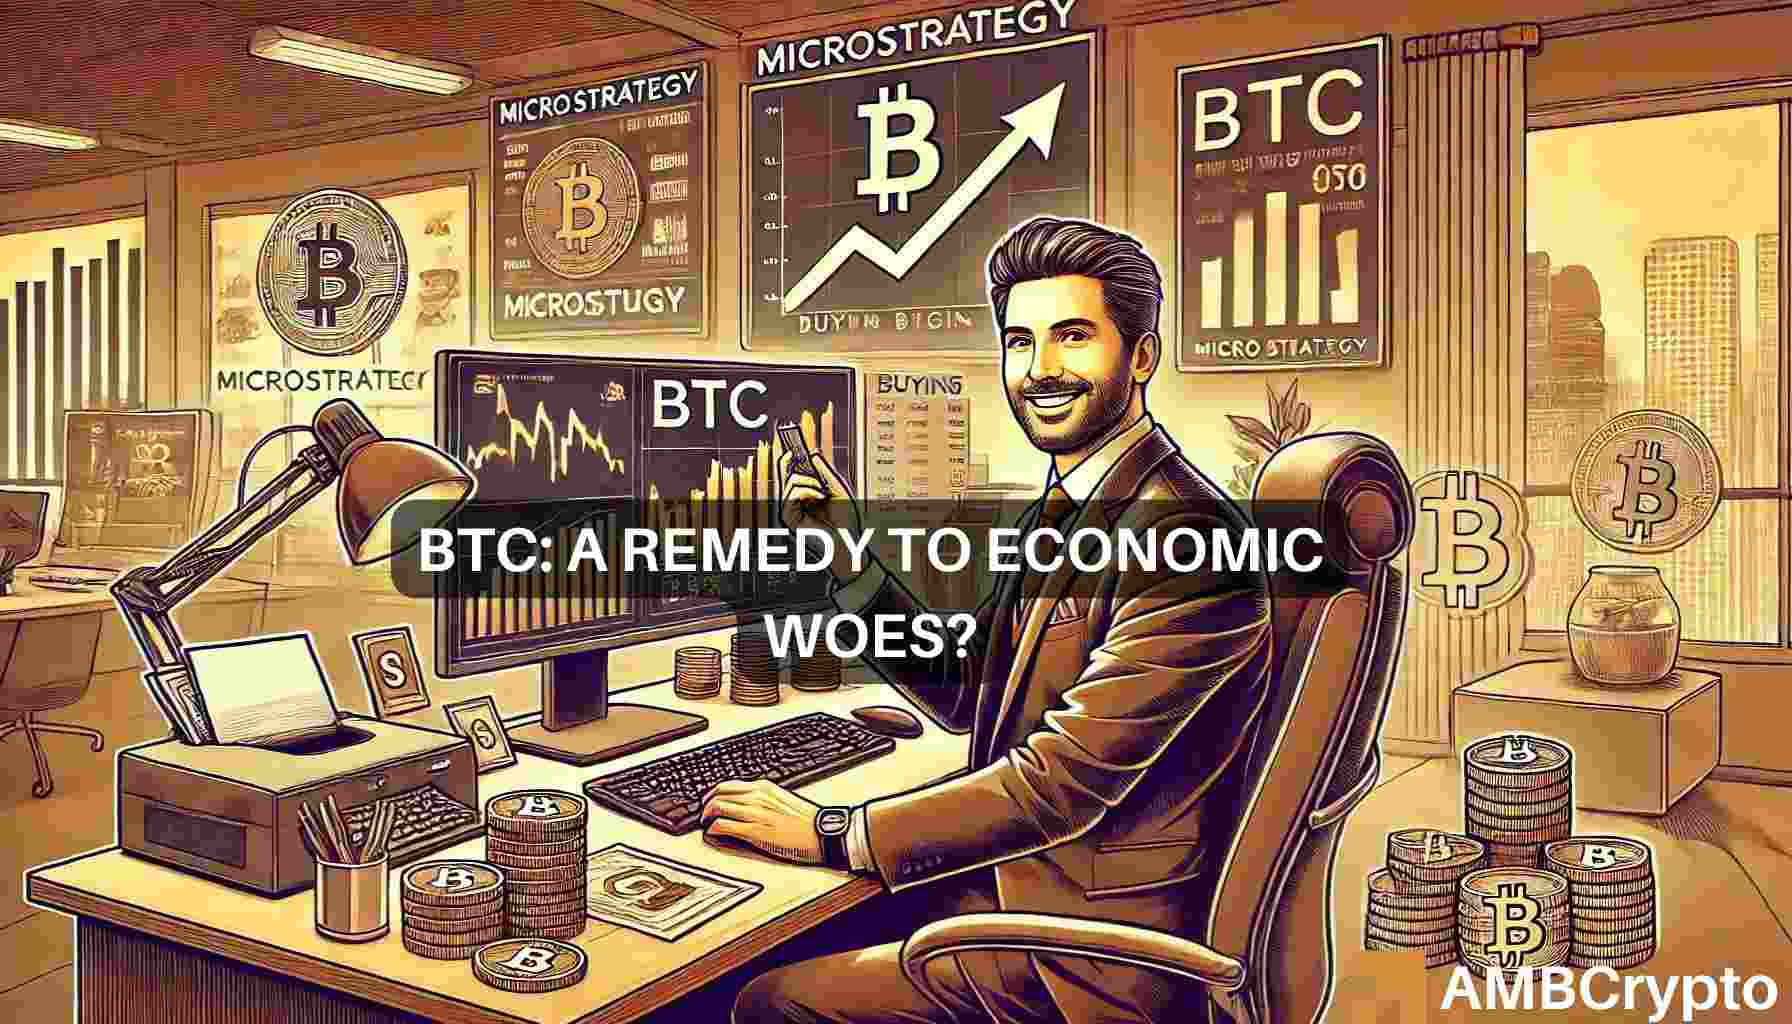 Bitcoin is the ‘cure’ to economic ill – Michael Saylor